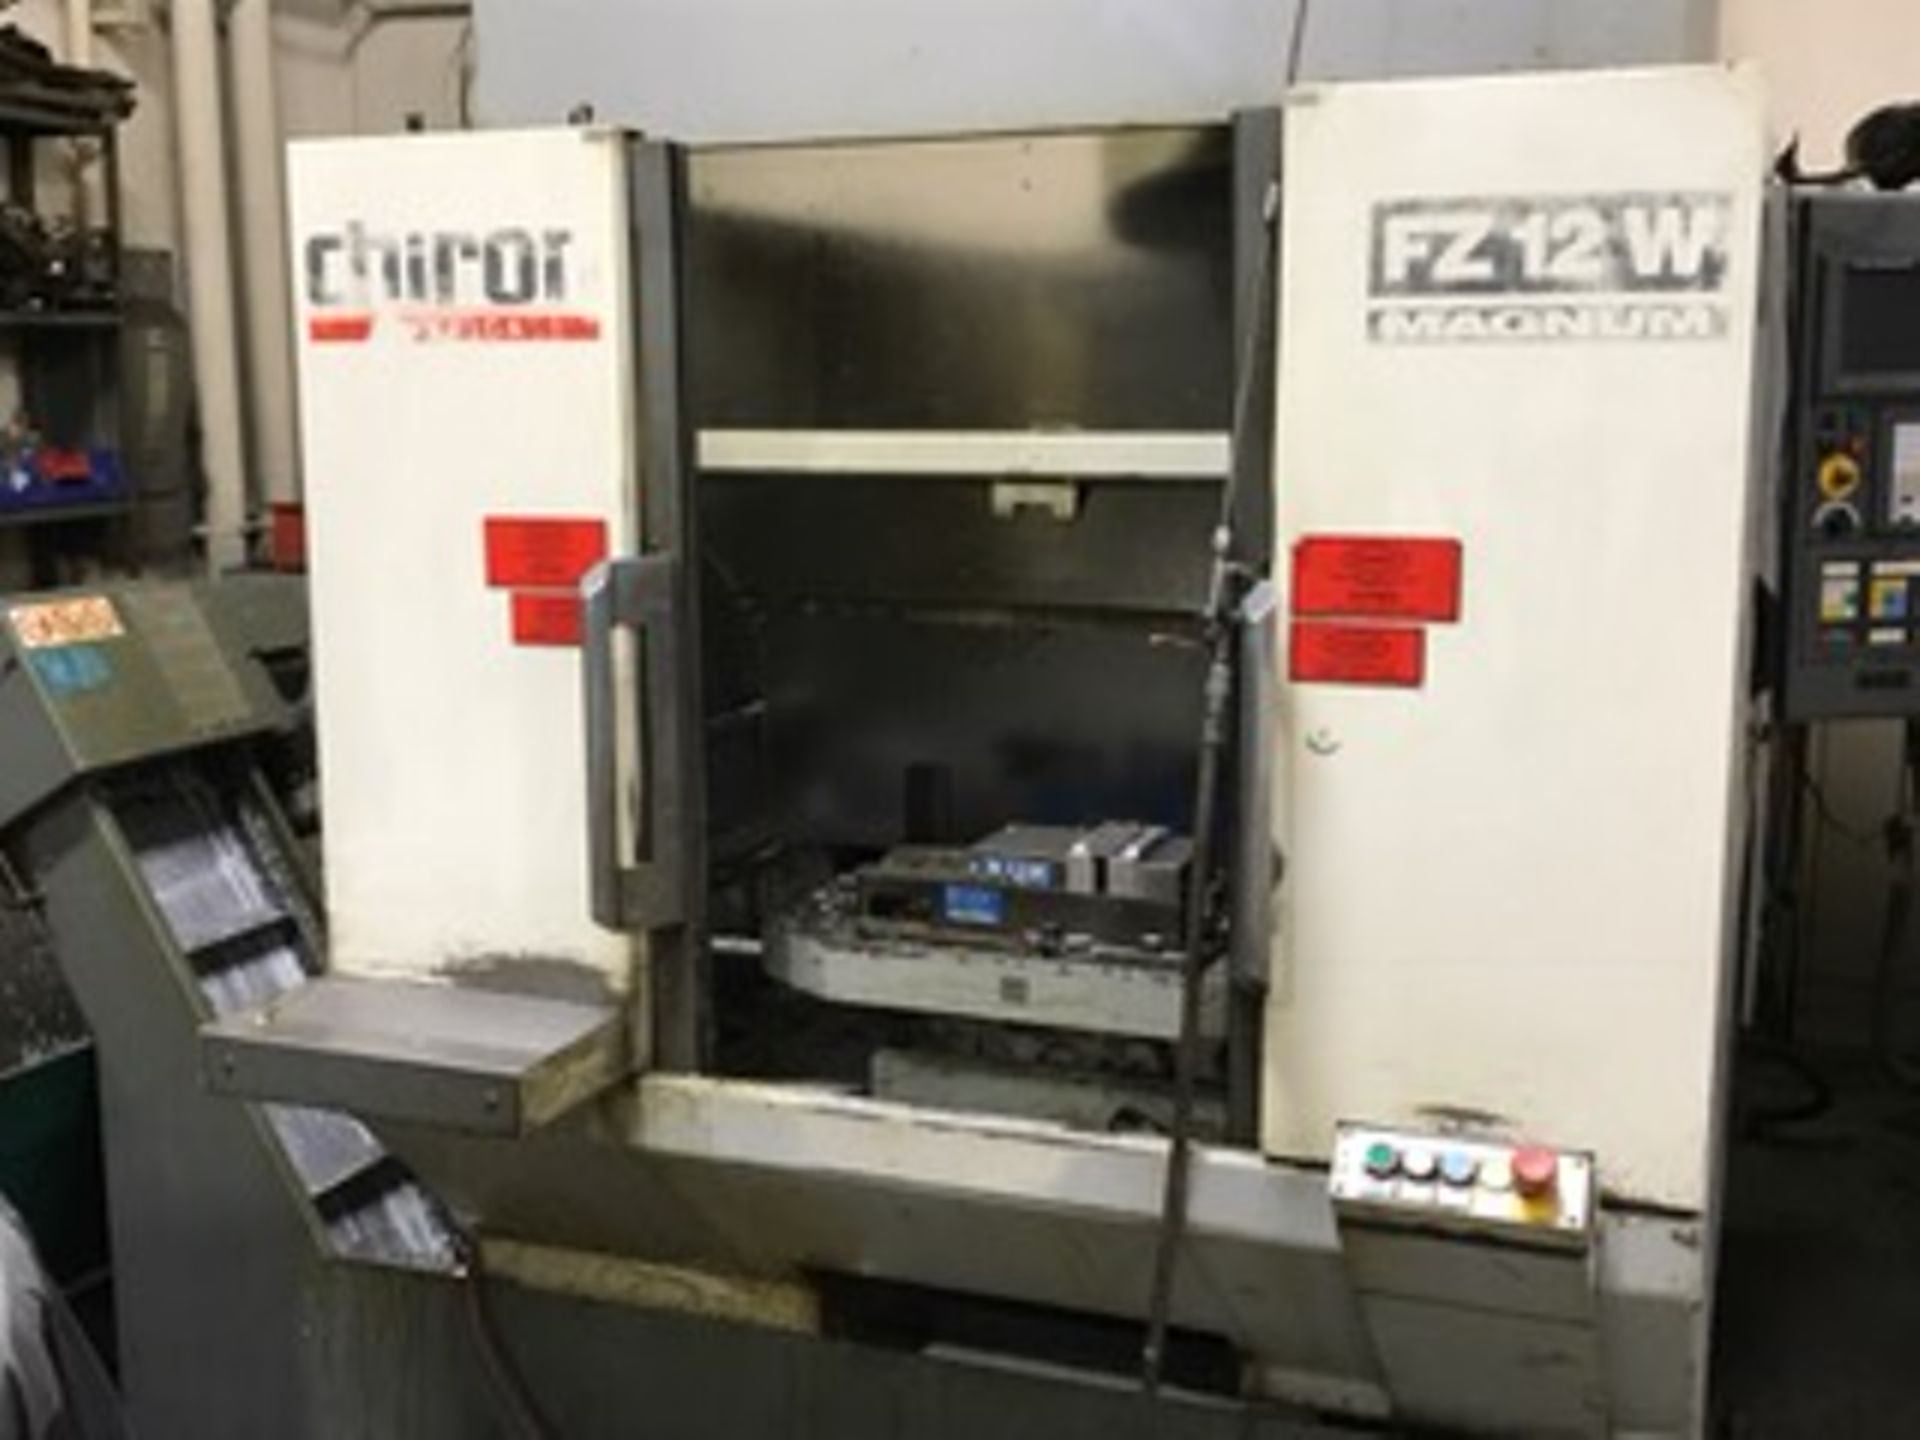 Chiron FZ-12W Magnum CNC Vertical Machining Center, S/N 469-33, New 1997 - Image 6 of 8